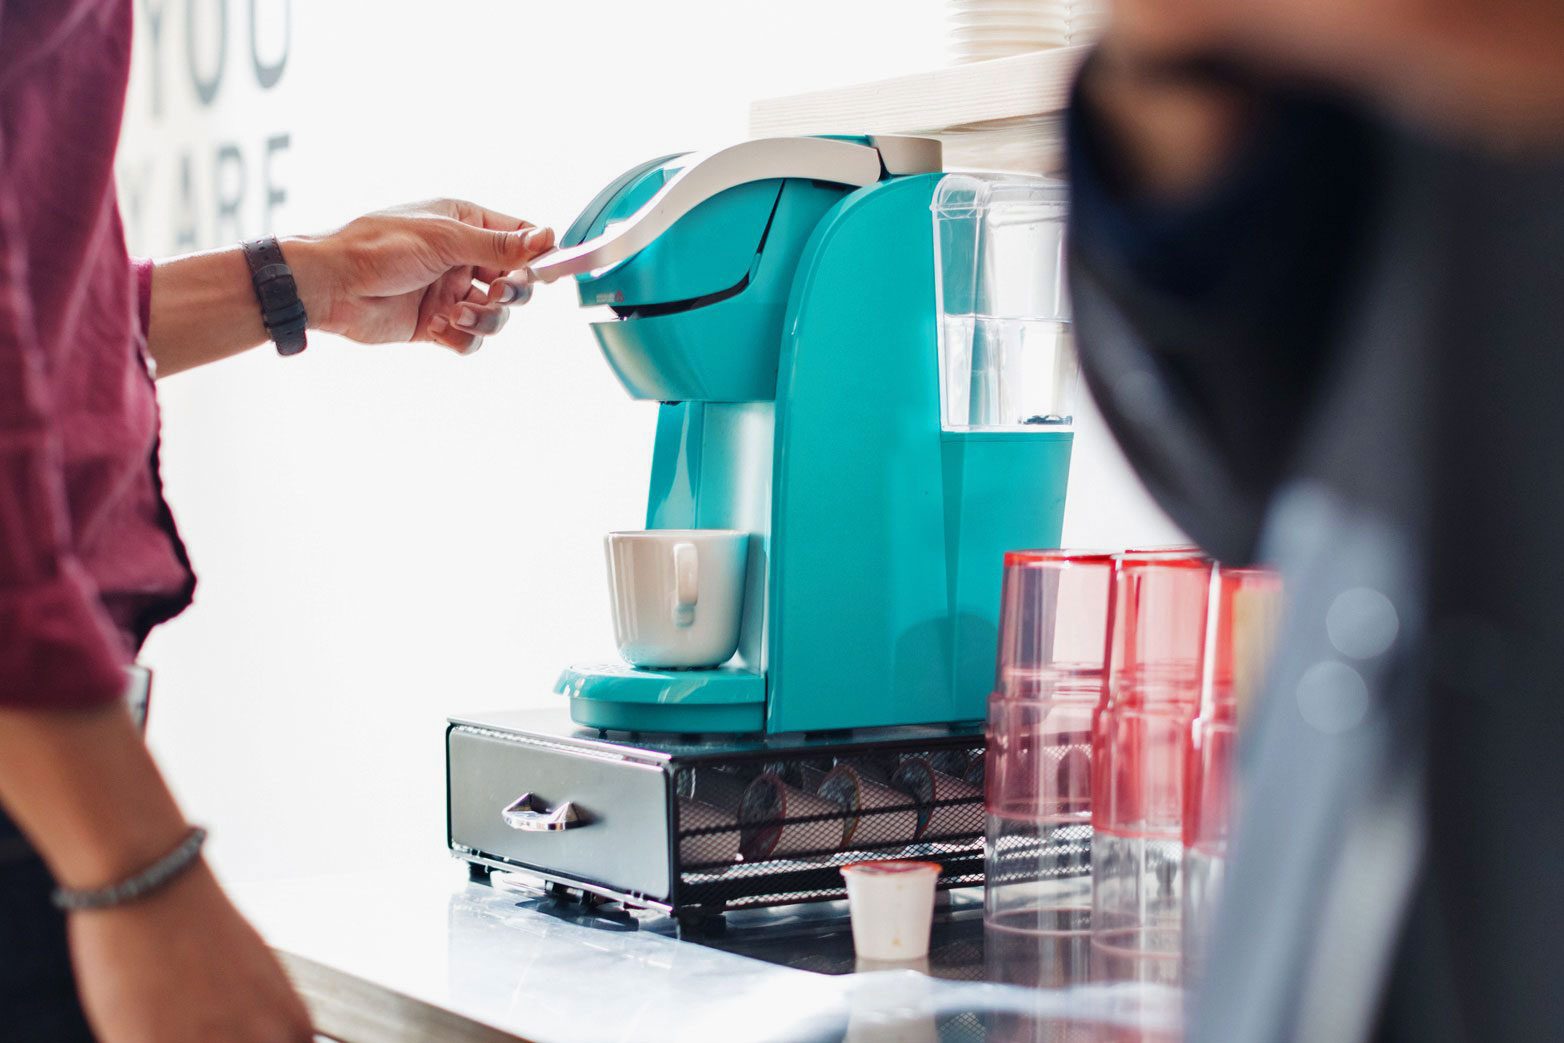 How to Clean a Keurig Coffee Maker (and Maintain It, Too)